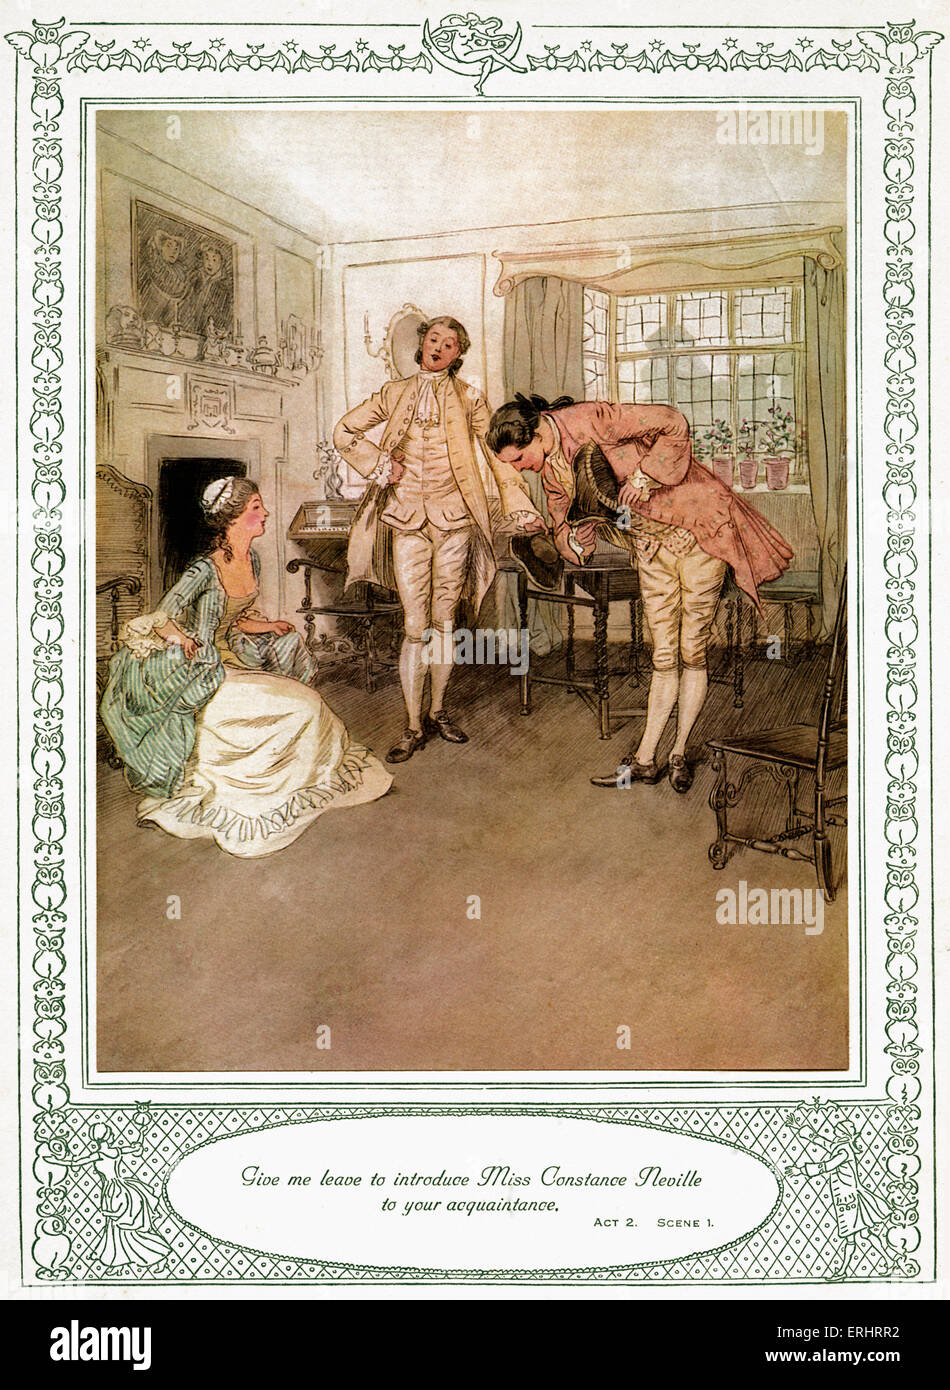 Oliver Goldsmith 's play - 'She Stoops to Conquer or The Mistakes of a Night'. Act 2, Scene I -  'Give me leave to introduce Stock Photo